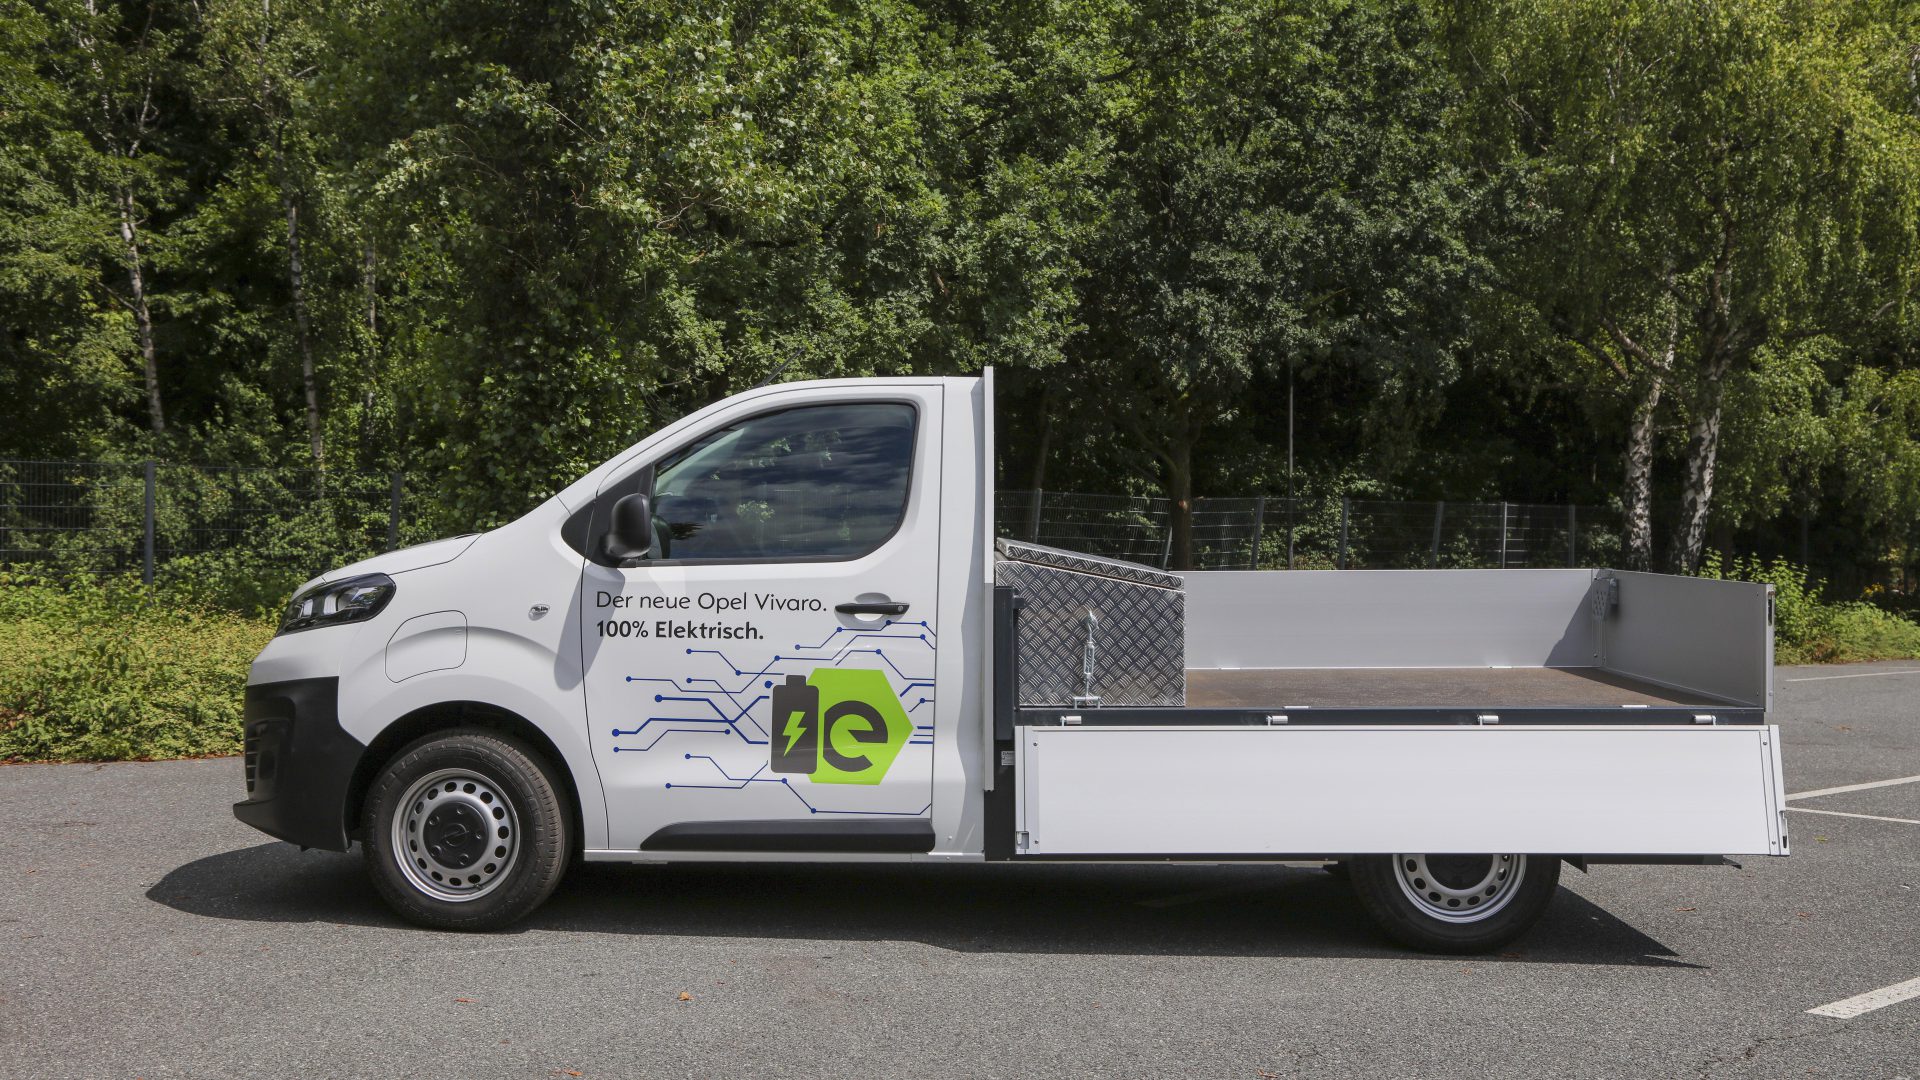 Opel Vivaro-e electric van now also released as flatbed truck